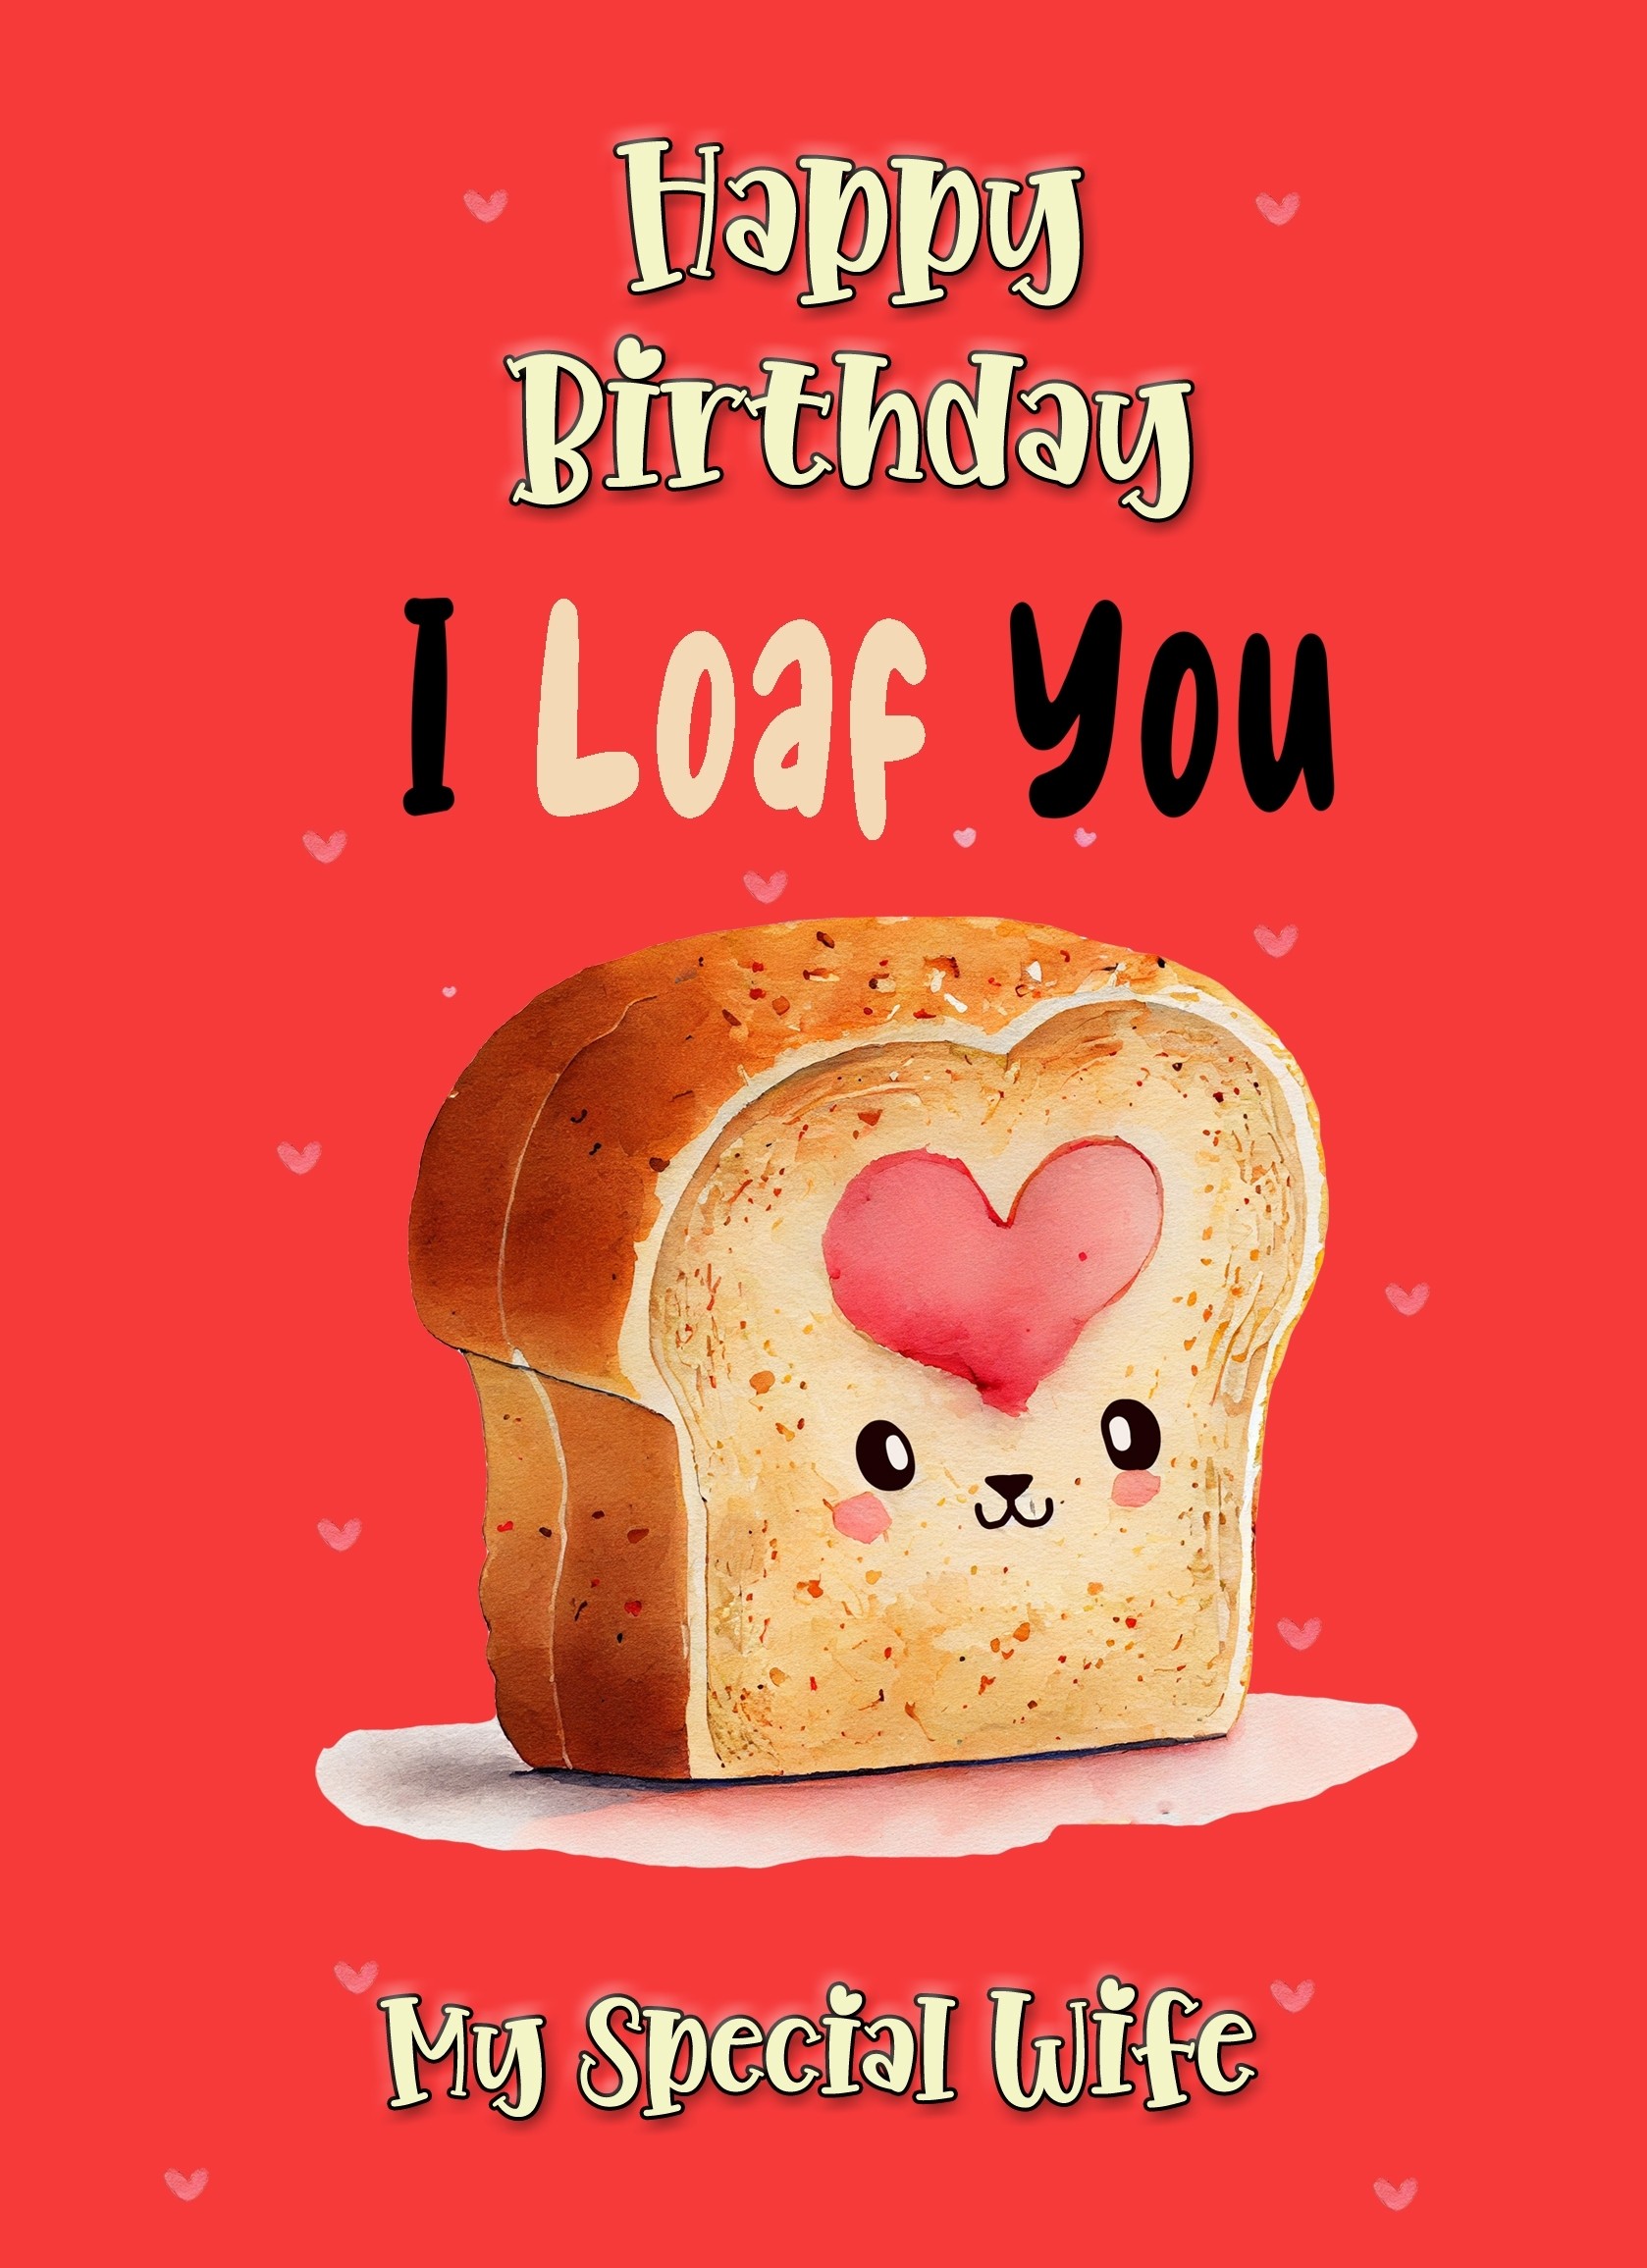 Funny Pun Romantic Birthday Card for Wife (Loaf You)